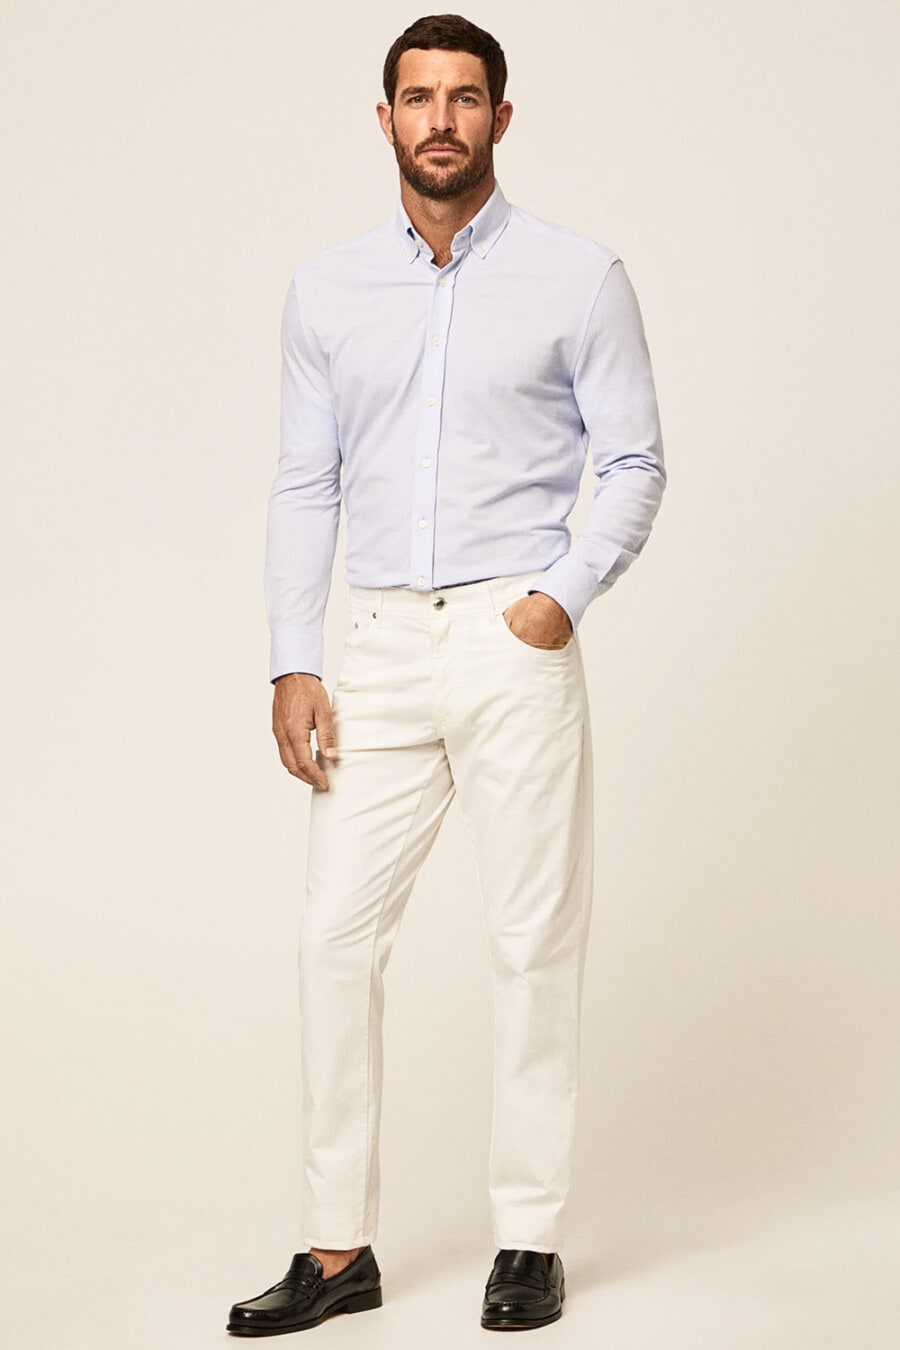 Men's off white jeans, tucked in pale lilac dress shirt and black leather penny loafers worn sockless outfit